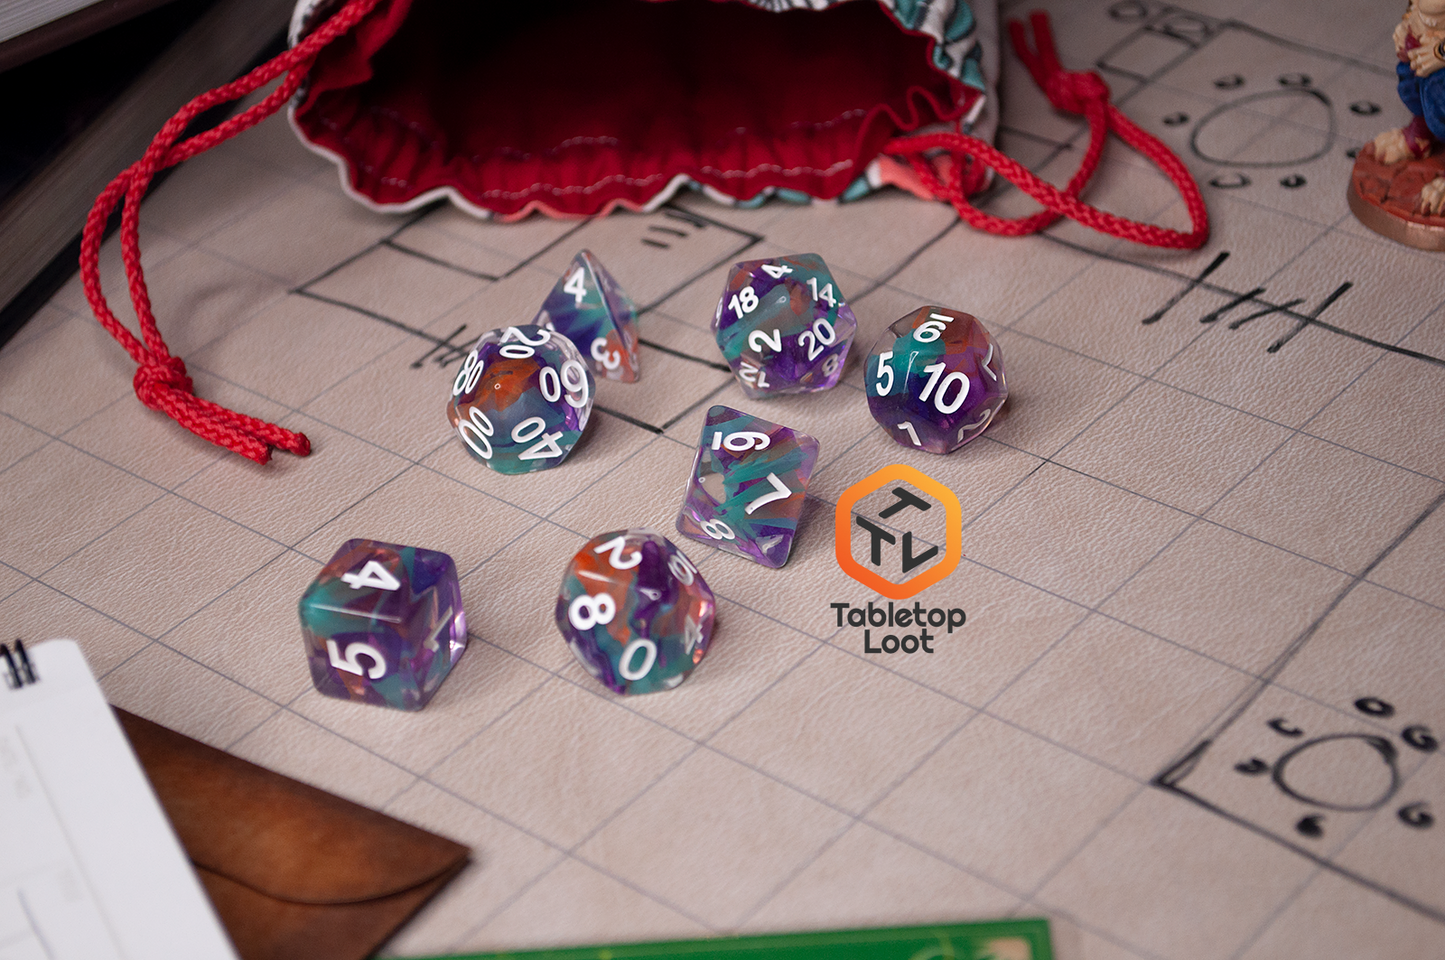 The Raise the Banners dice set, clear with swirled orange, blue, and purple resin, on a gaming table.